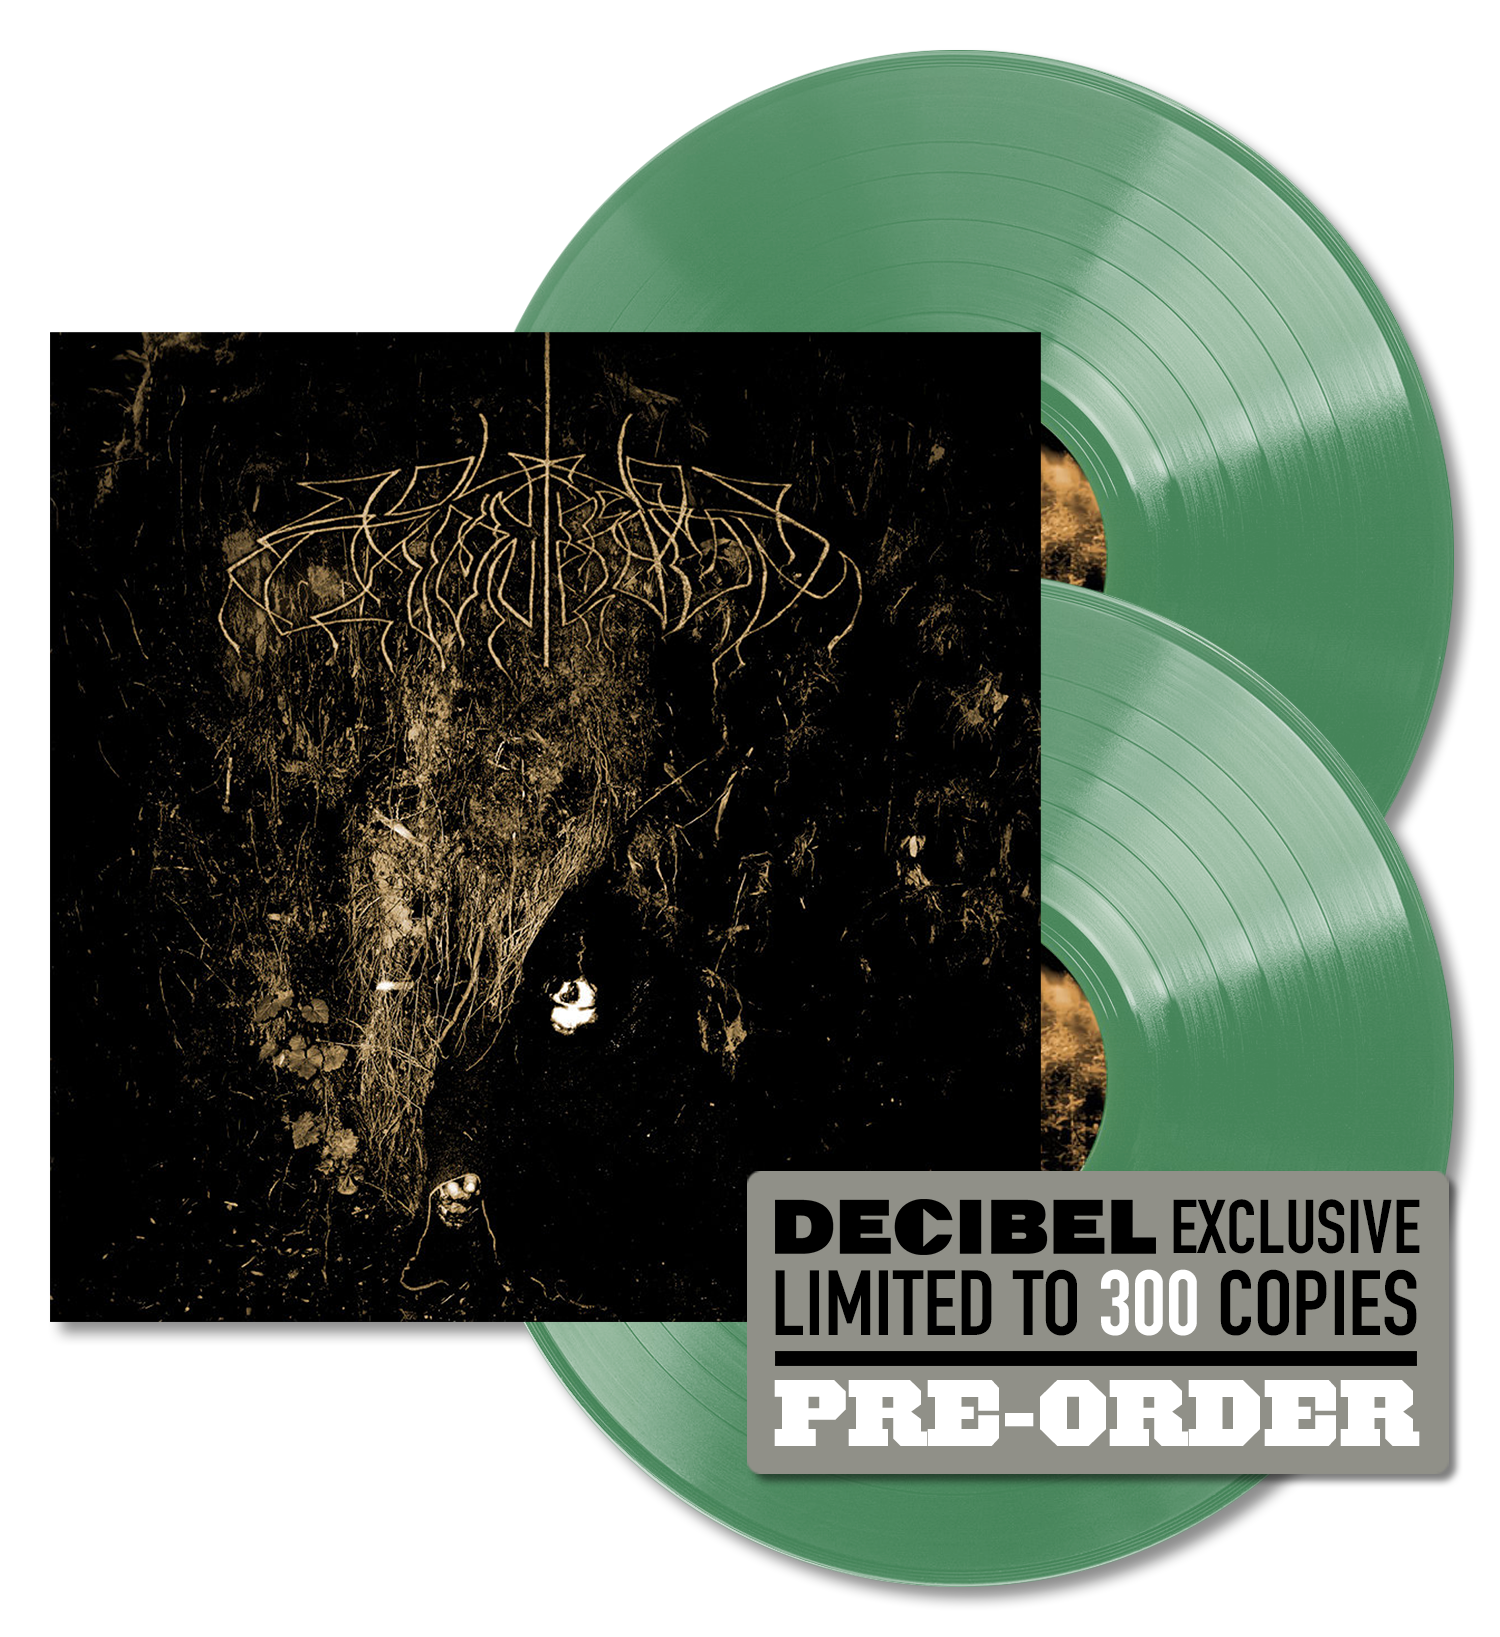 Pre-Order WOLVES IN THE THRONE ROOM’s Essential Repress of ‘Two Hunters’ on Limited Edition Vinyl RIGHT NOW!